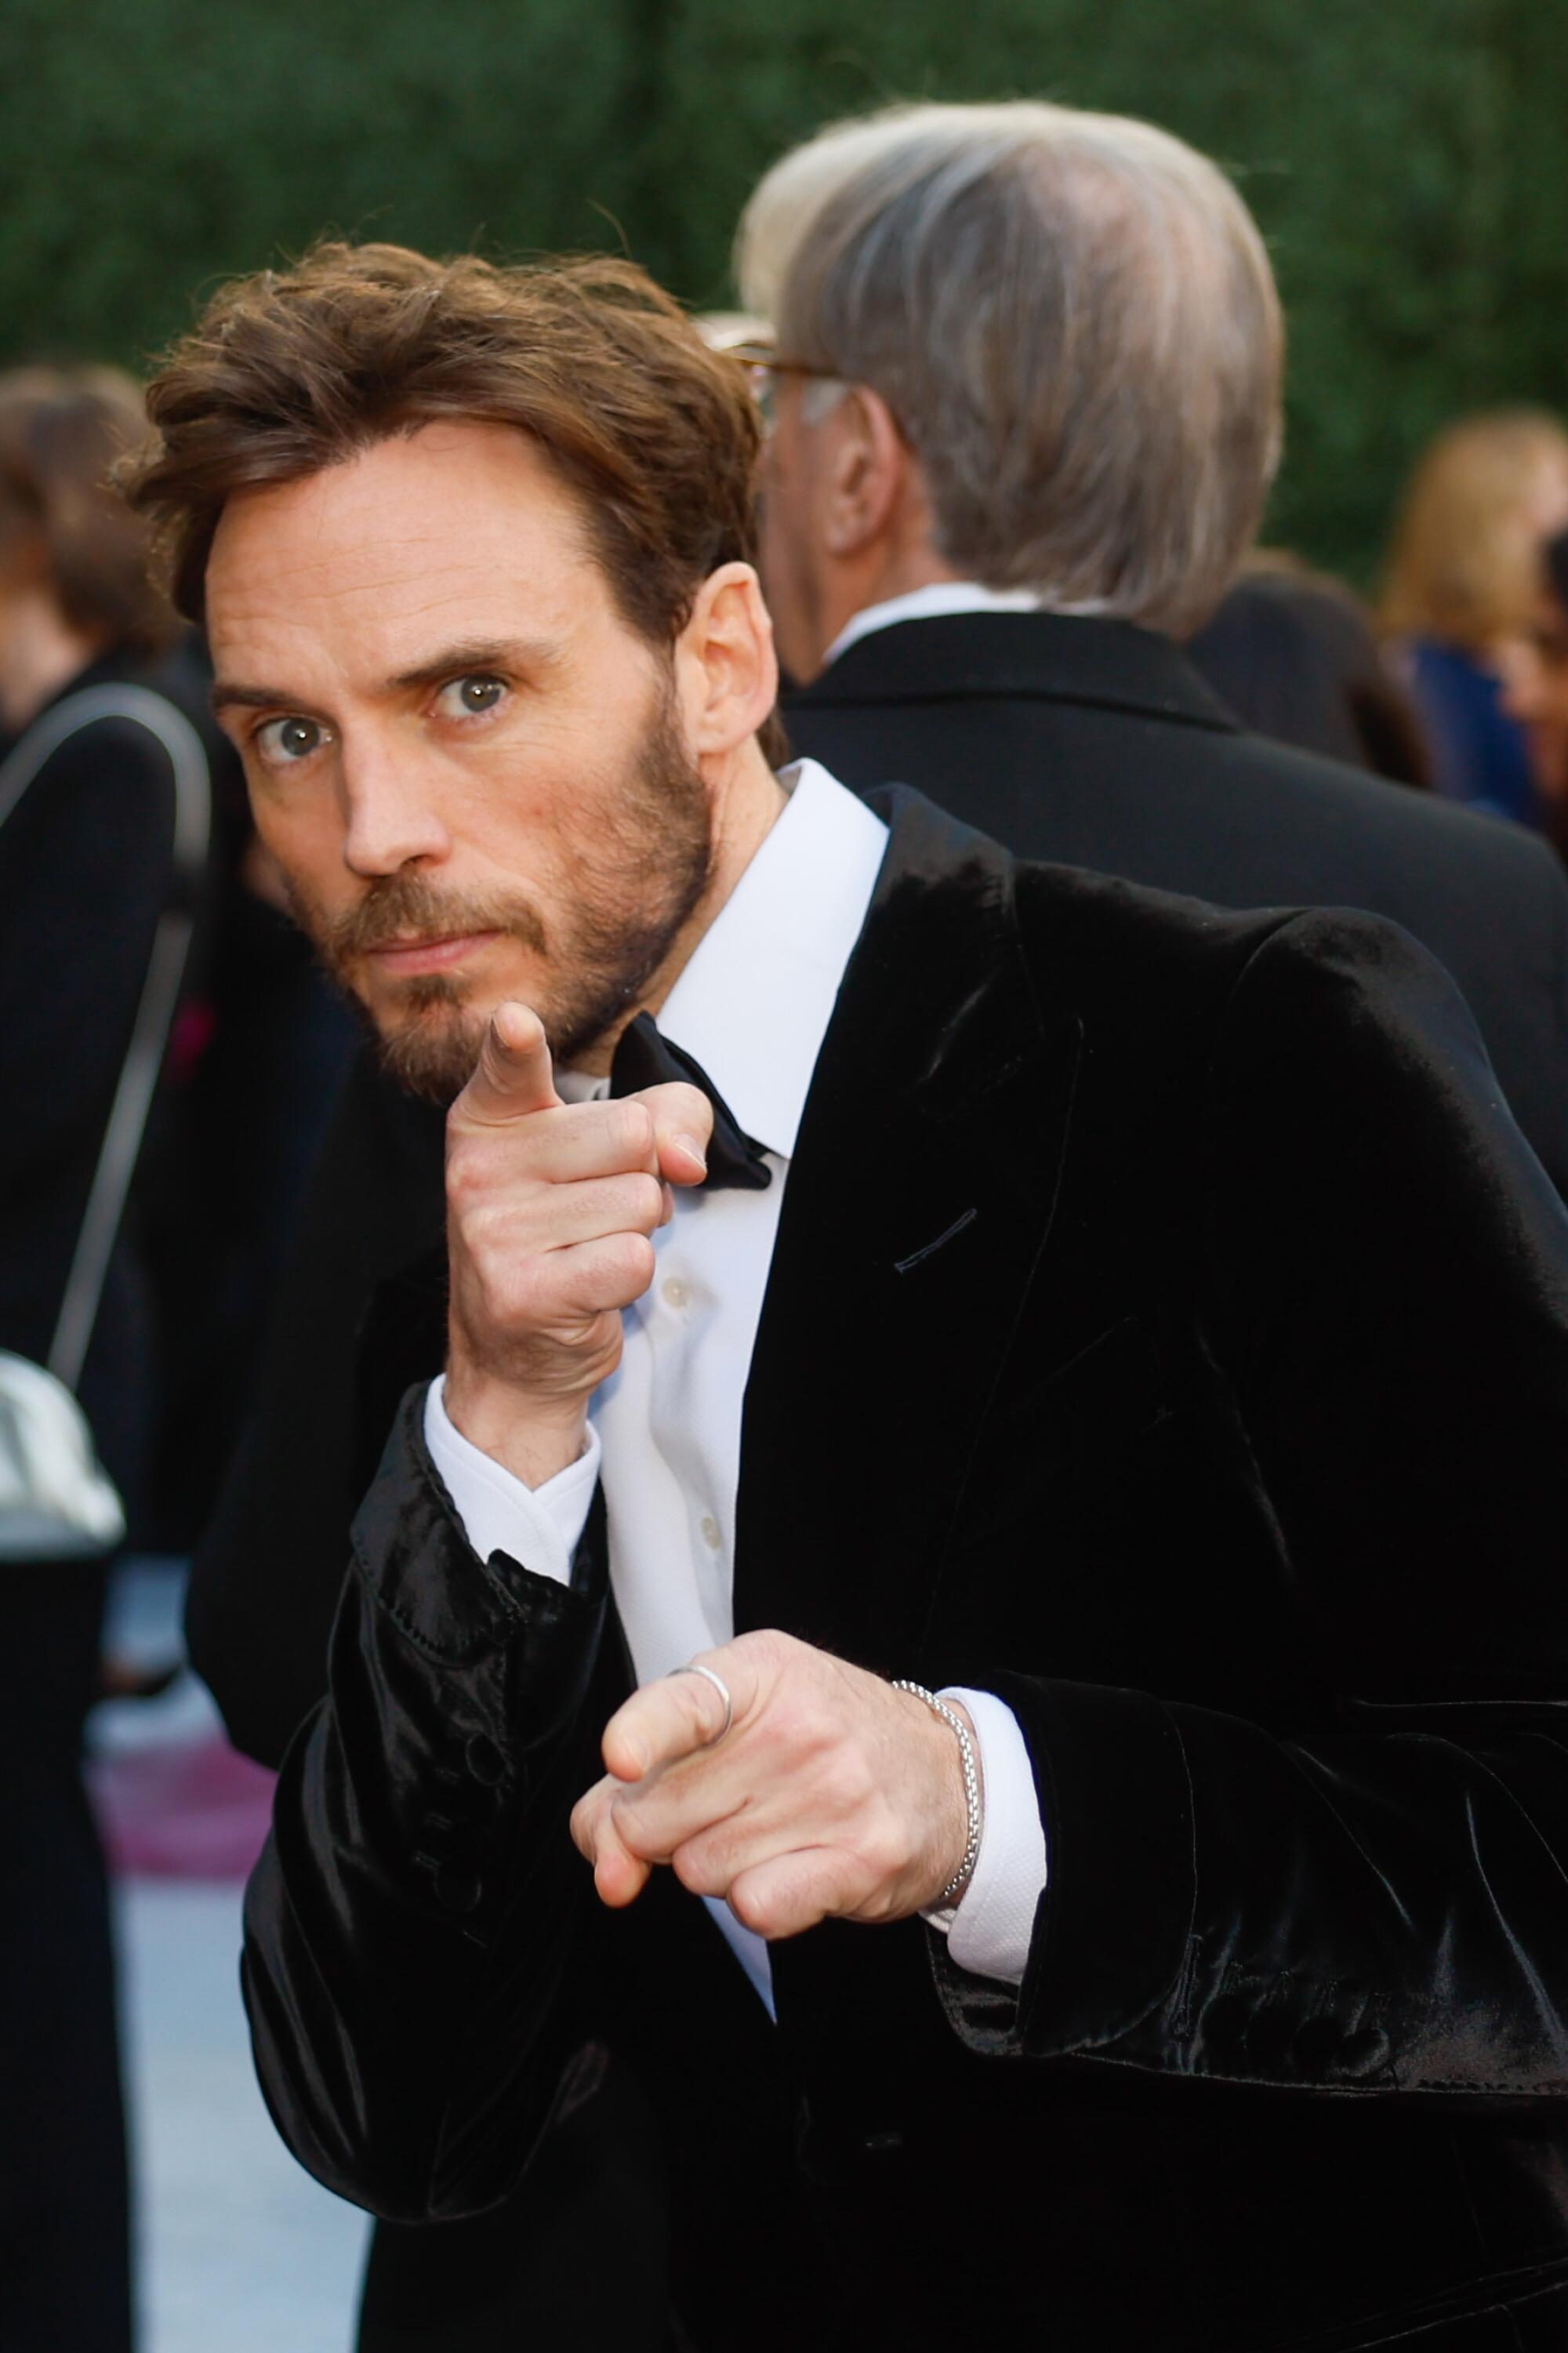 Sam Claflin points at the camera at the Emmy Awards.